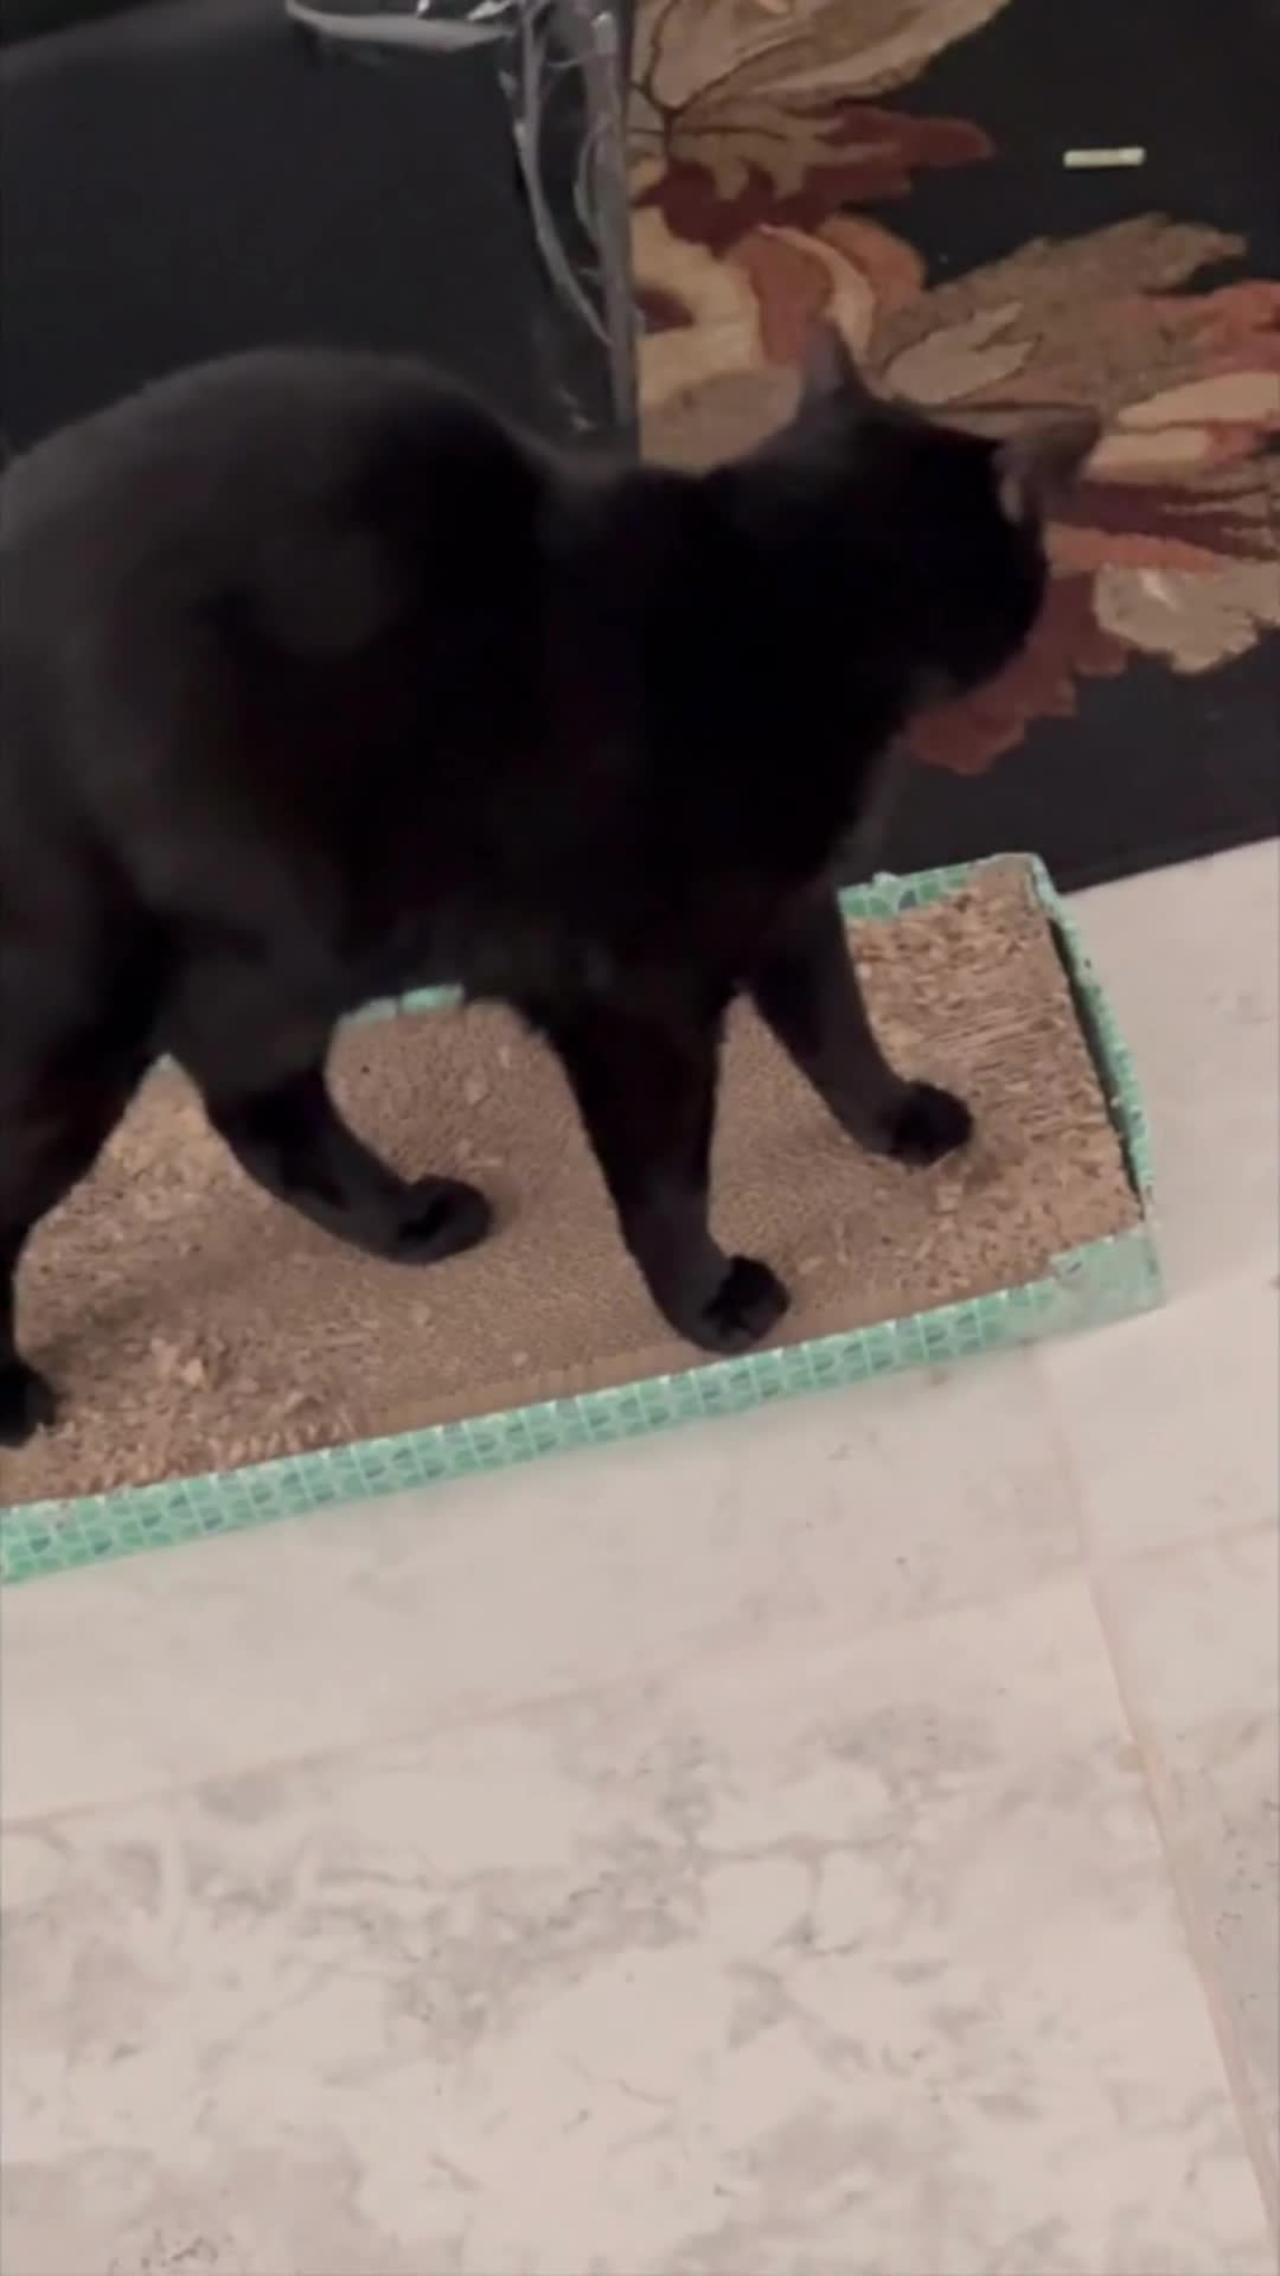 Adopting a Cat from a Shelter Vlog - Precious Piper Looks So Cute Sitting on Her Tuffet  #shorts